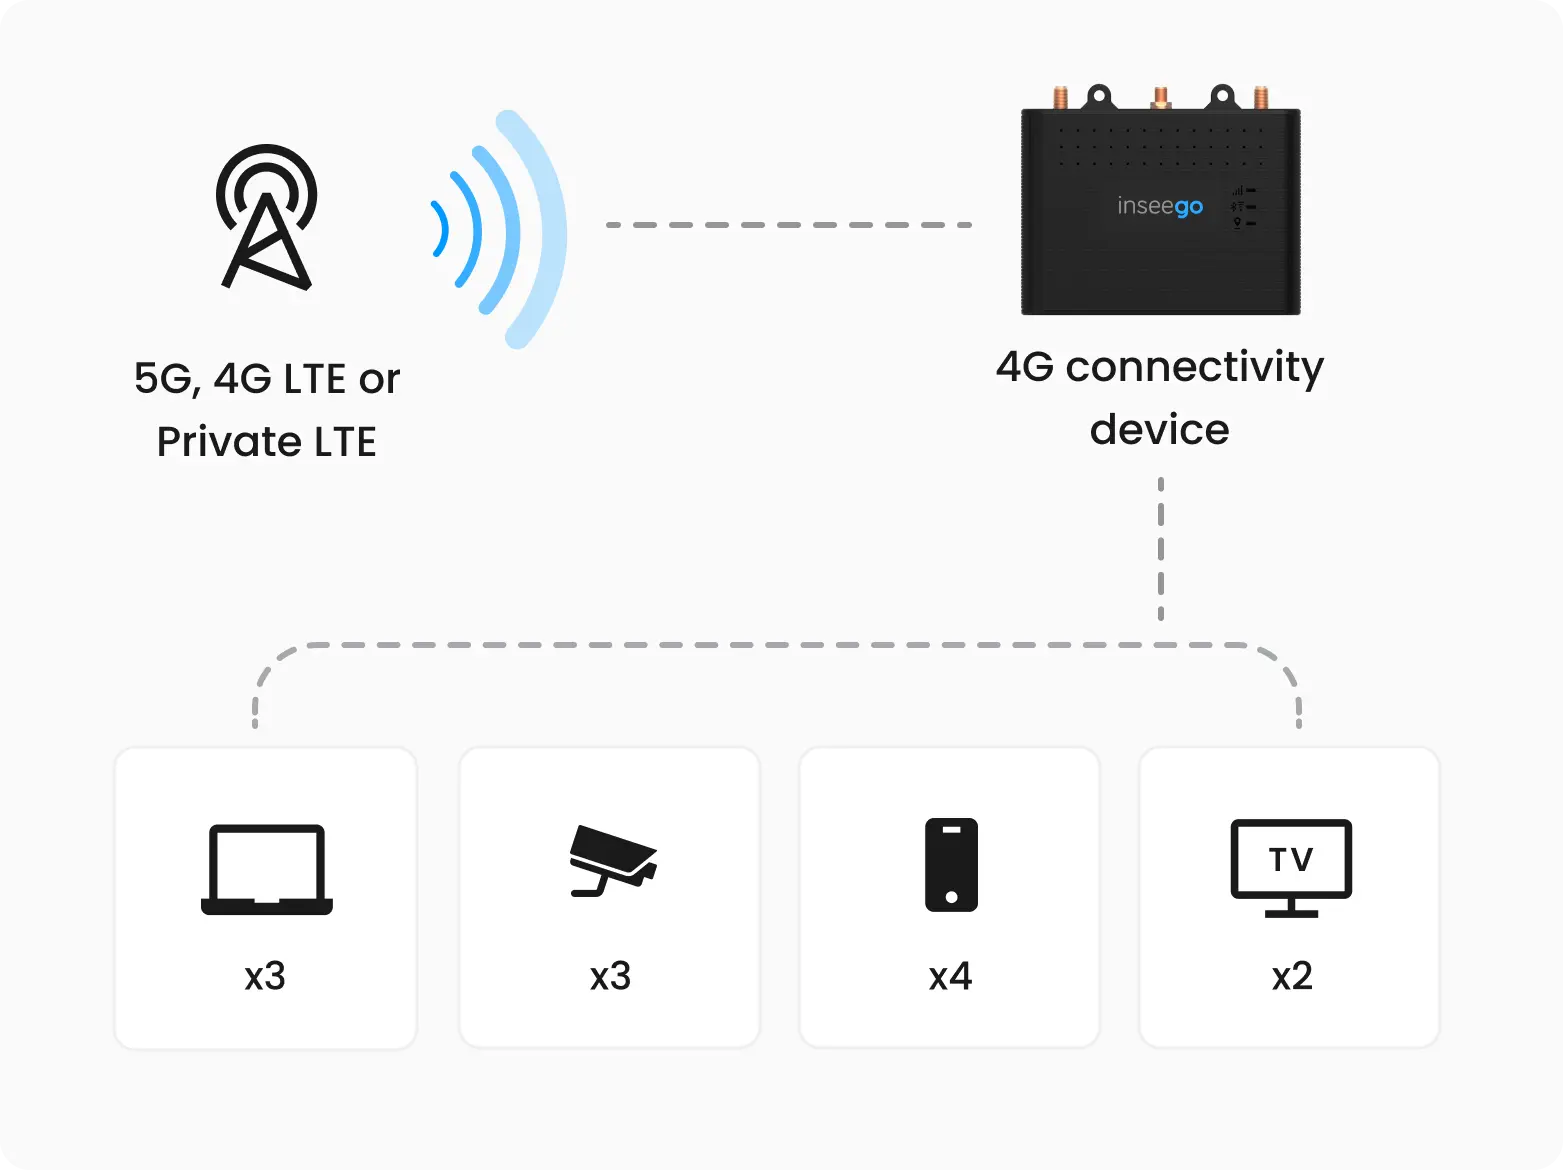 Infographic showing how 4G LTE devices connect multiple devices.